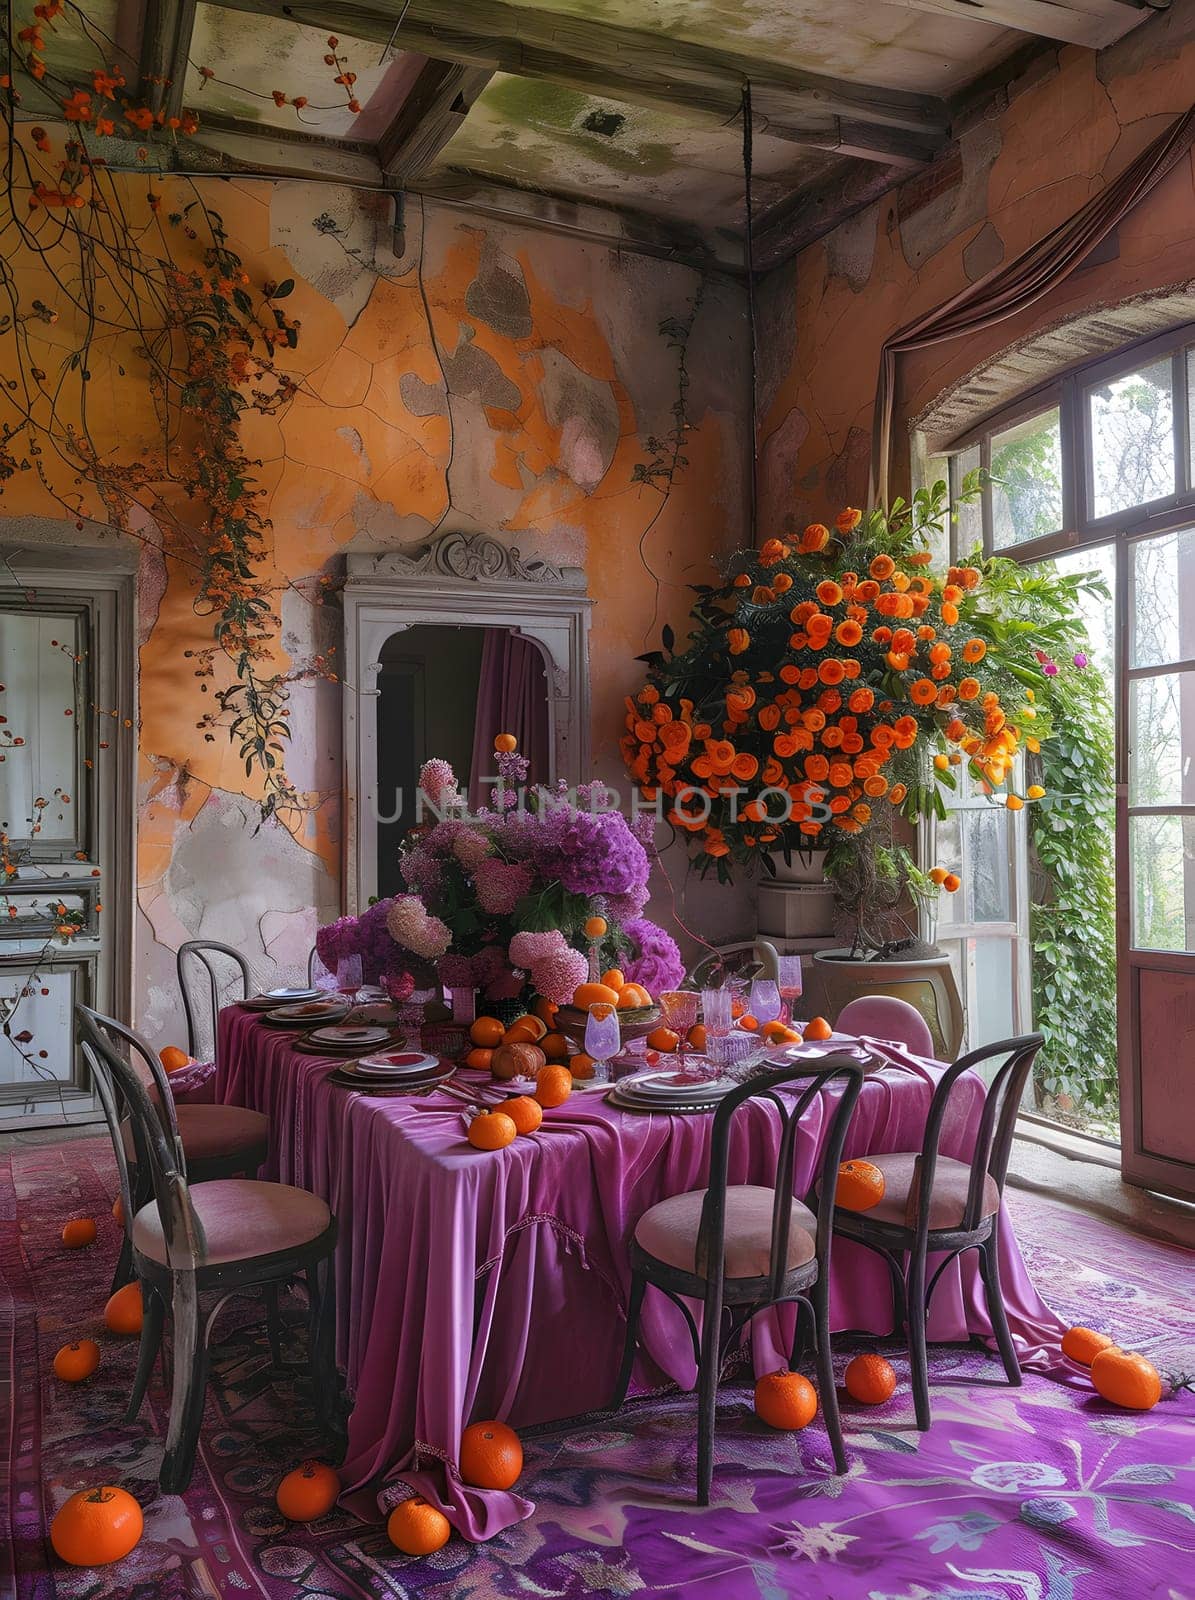 An interior design featuring a dining room adorned with Halloween decor, including a purple table and chairs, spooky plants, and themed window decorations